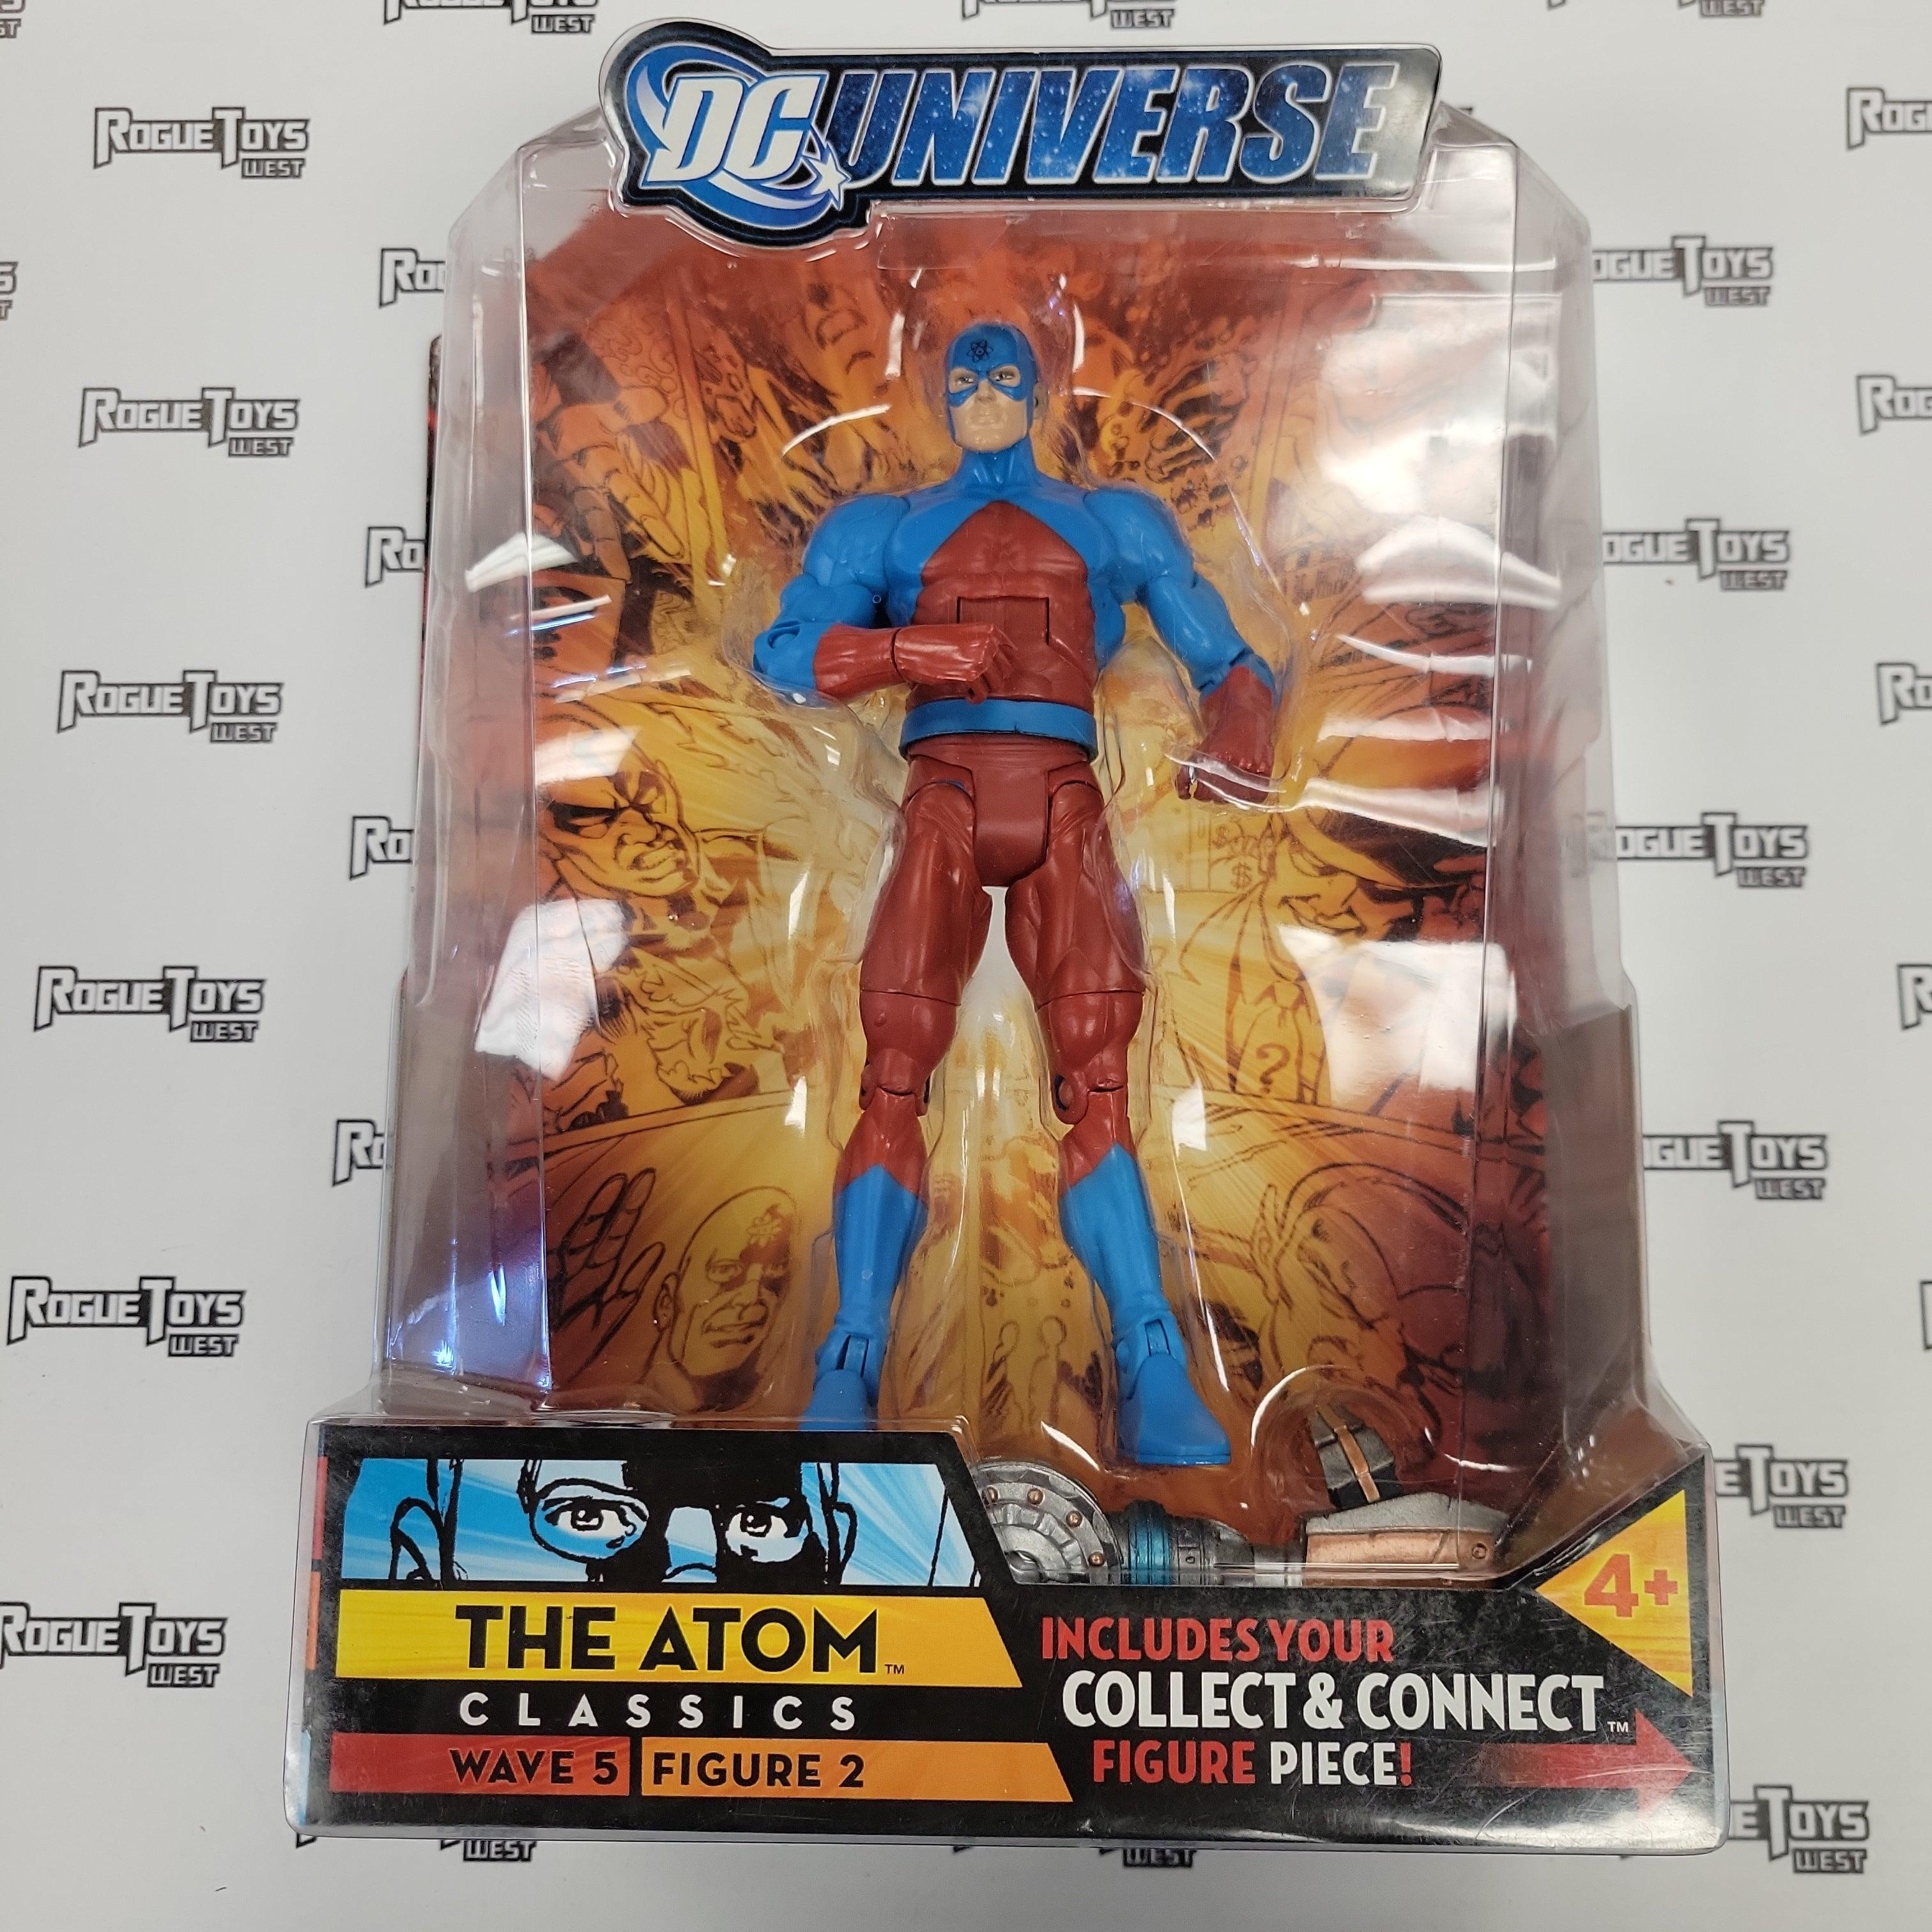 MATTEL DC Universe Classics (DCUC) Wave 5 (Metallo Collect & Connect Series, Walmart Exclusive), The Atom - Rogue Toys